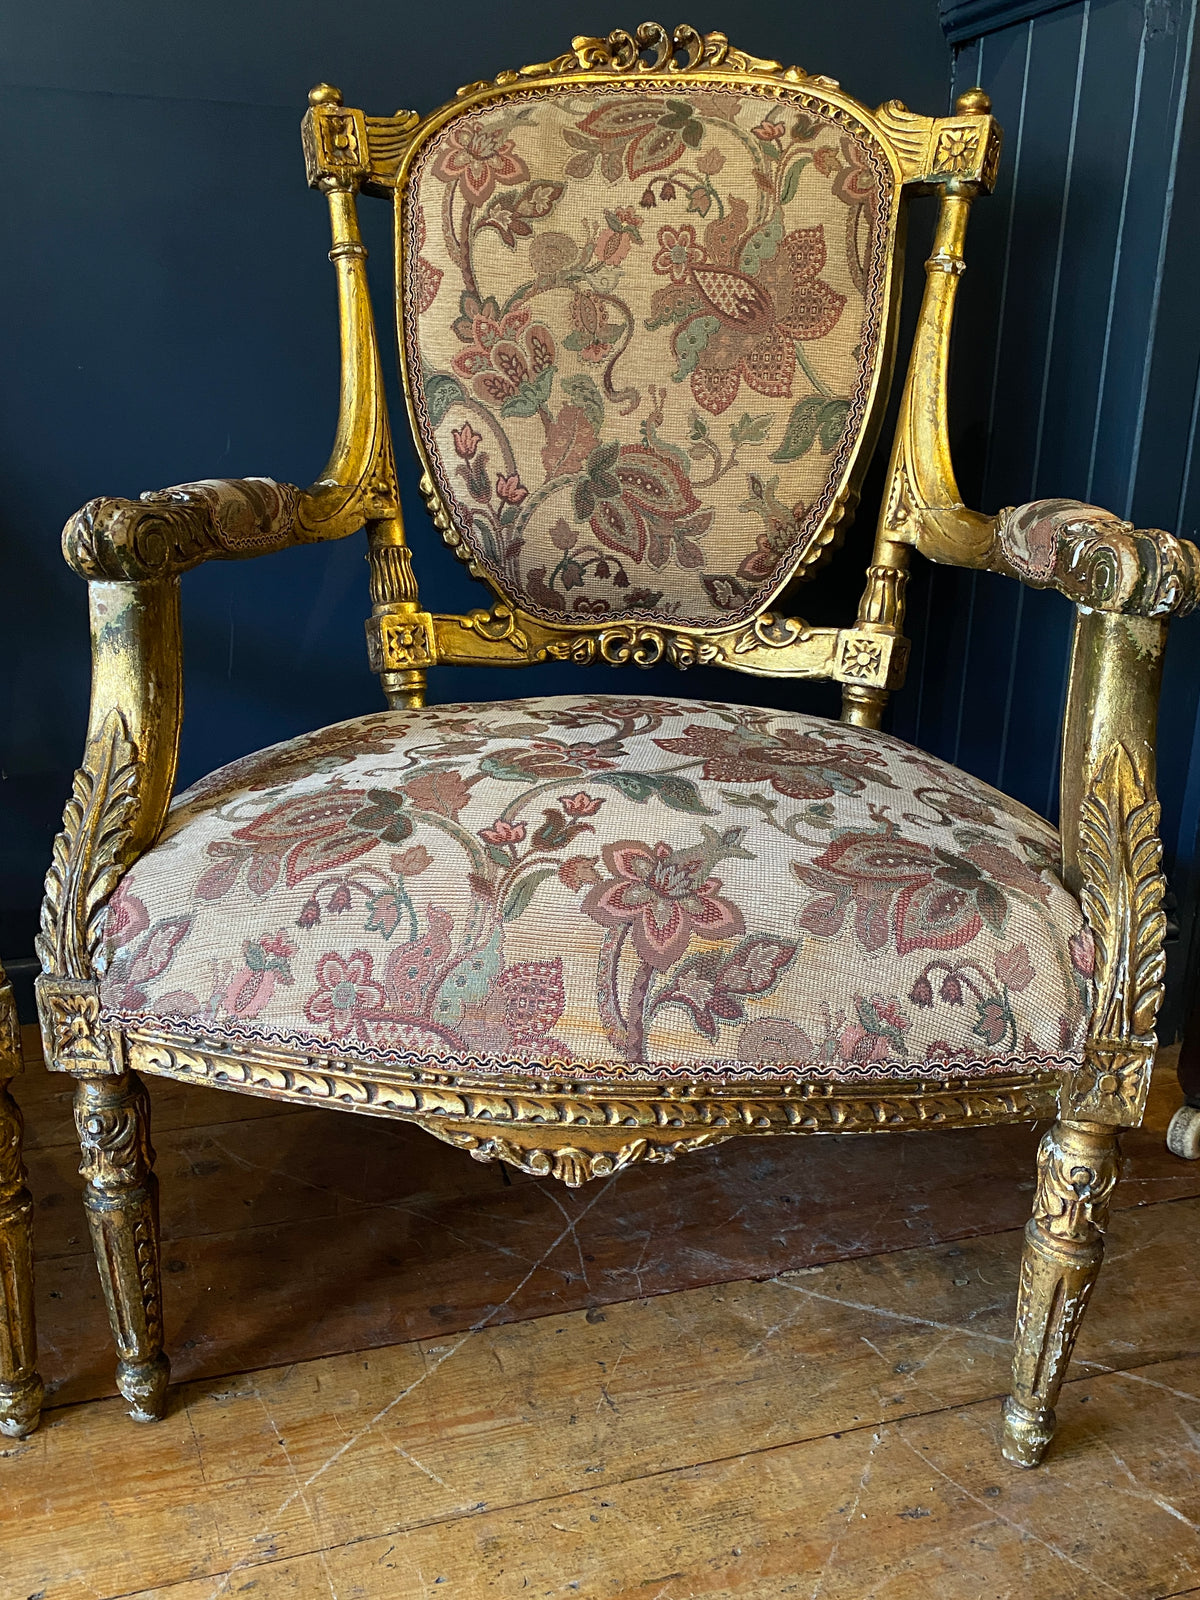 French Louis XVI Gilt Wood Parlor Chairs- Pair